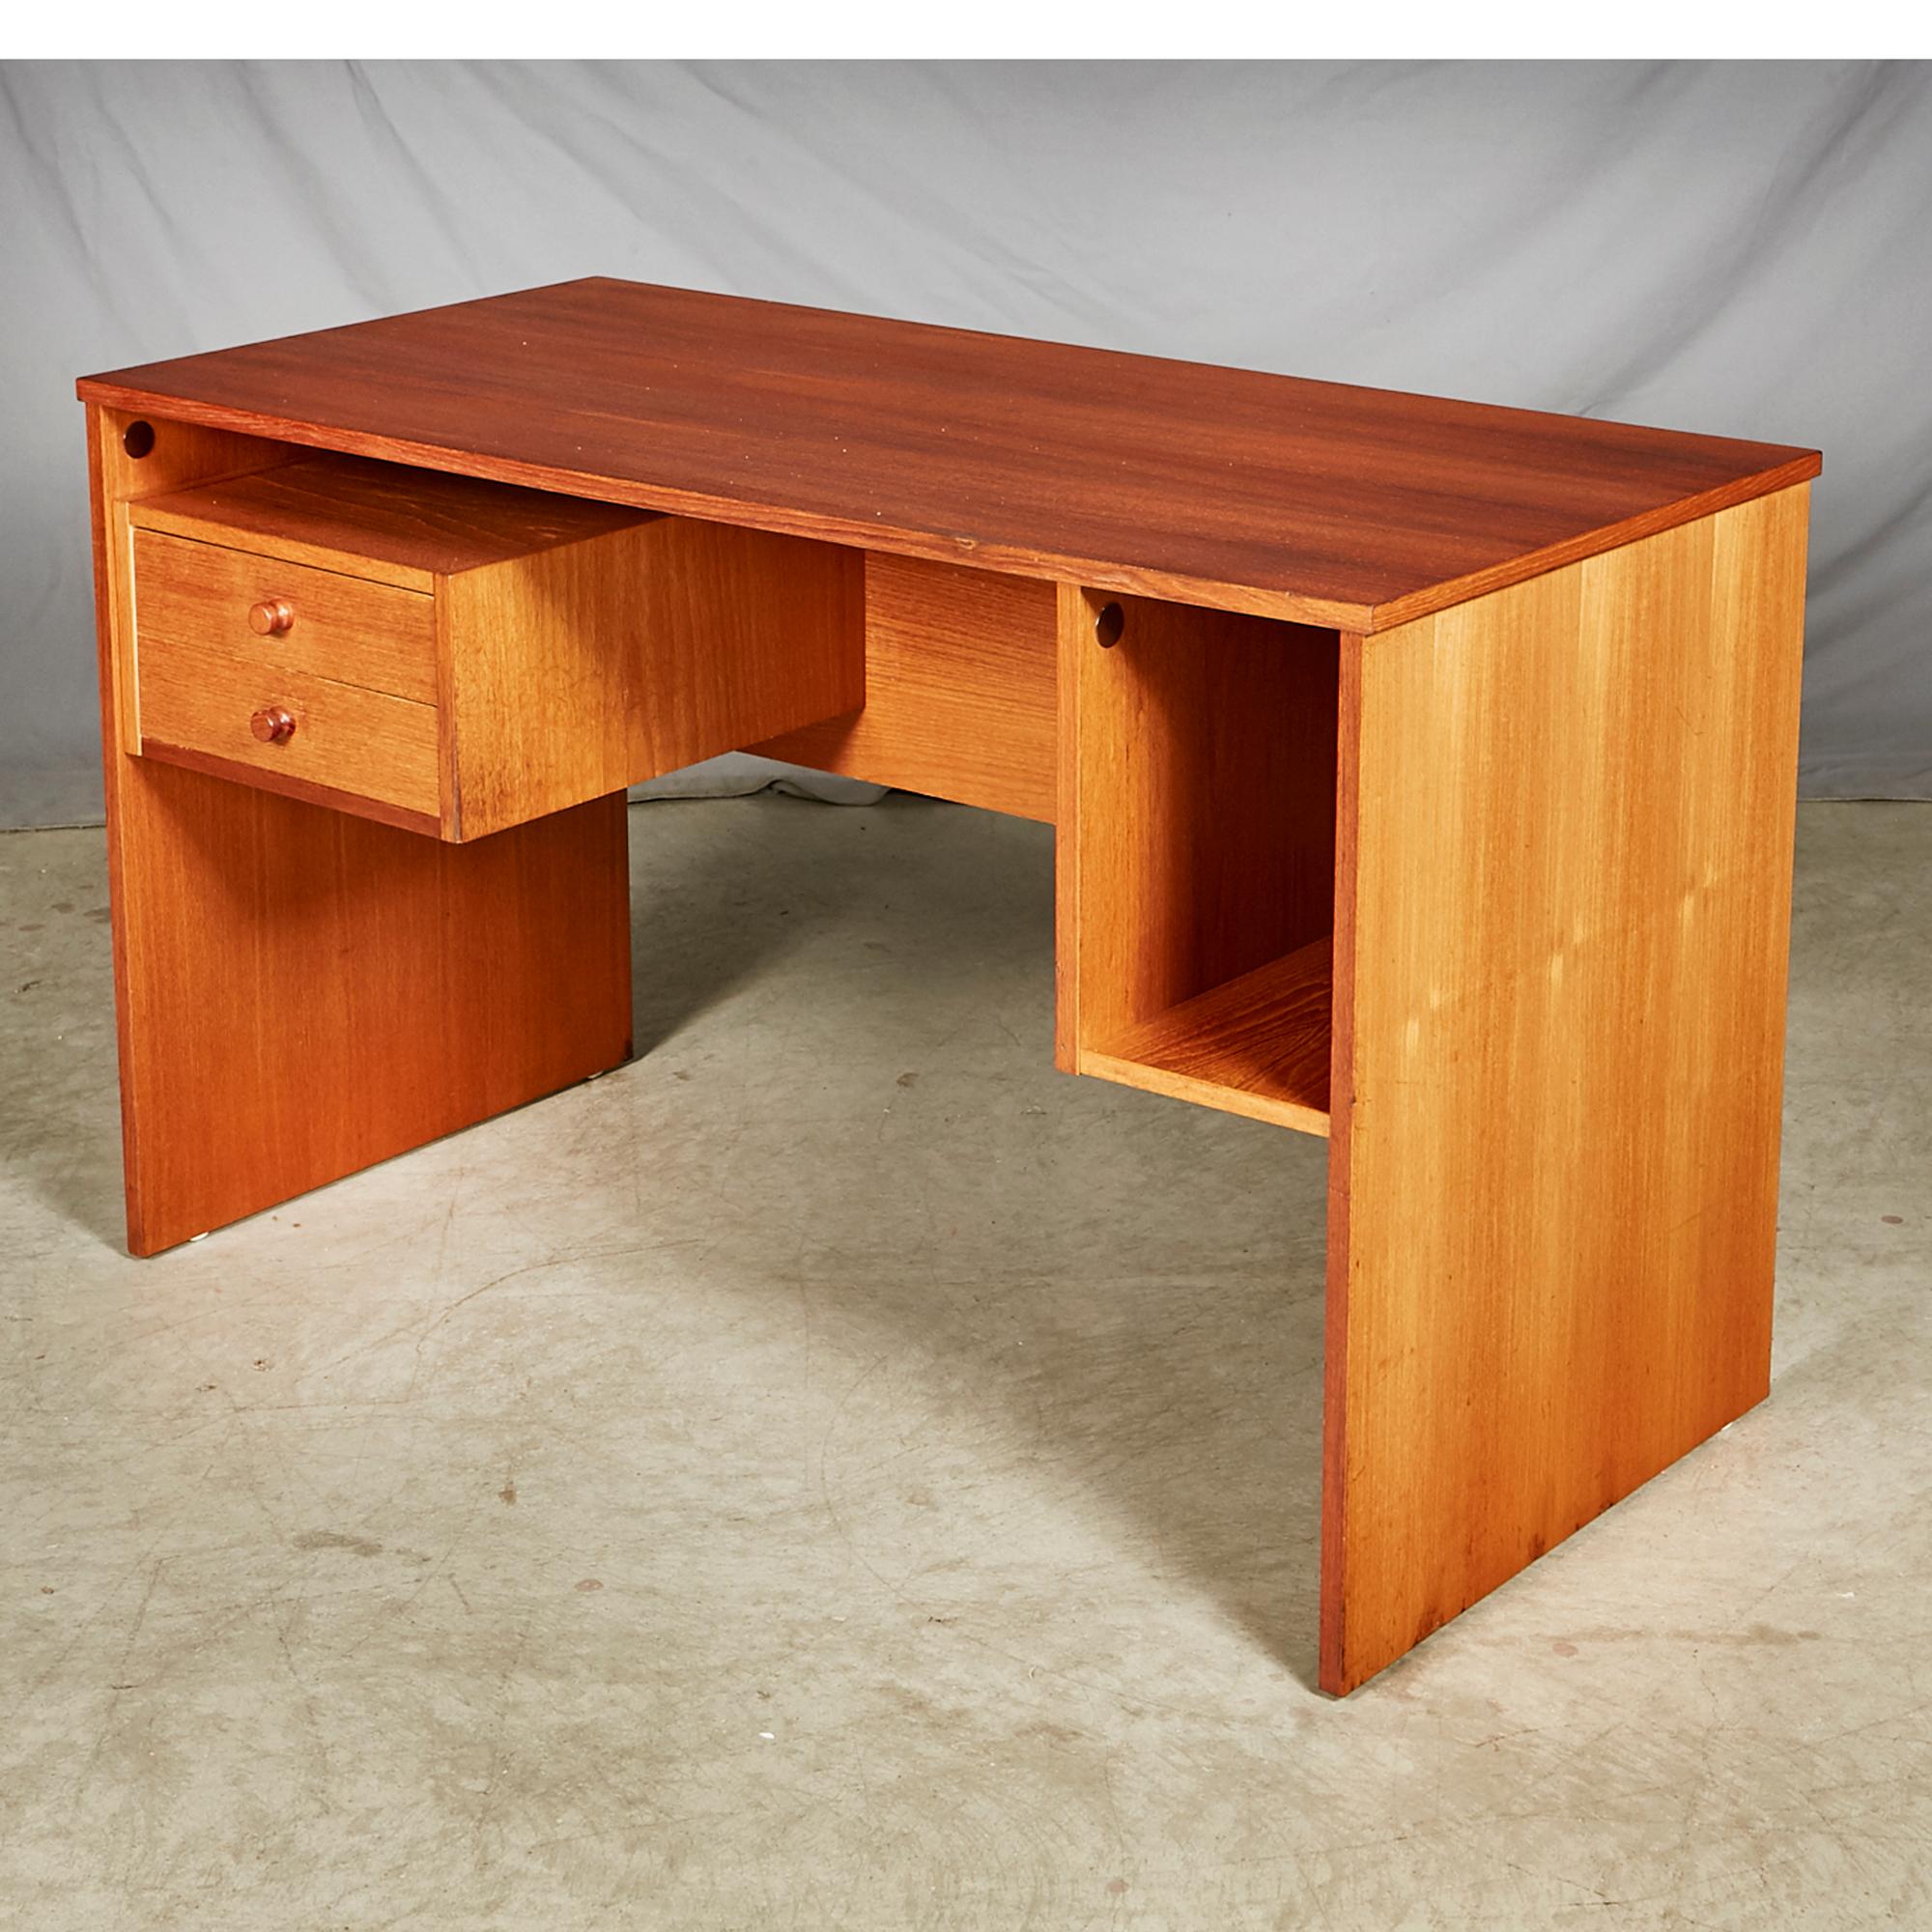 1970s Danish teak desk with two drawers and a storage cubby. Newly refinished. Marked: Domino Mobler, Denmark.